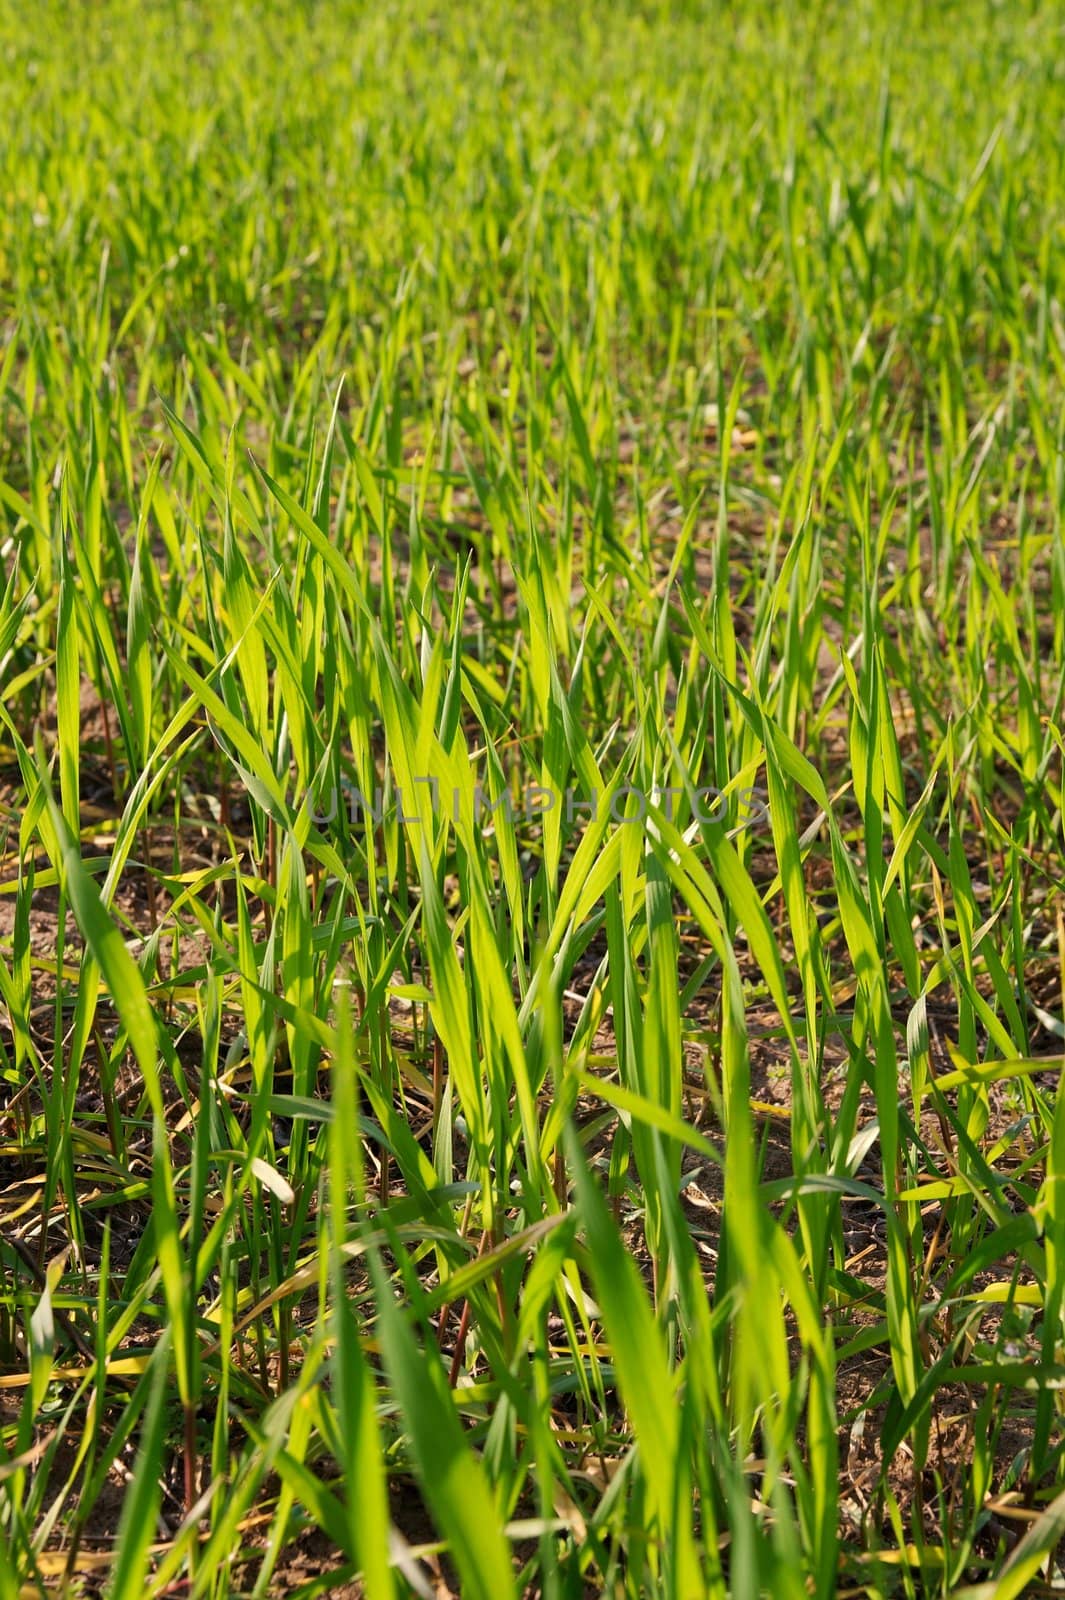 Closeup of a green agricultural field with fresh wheat plants